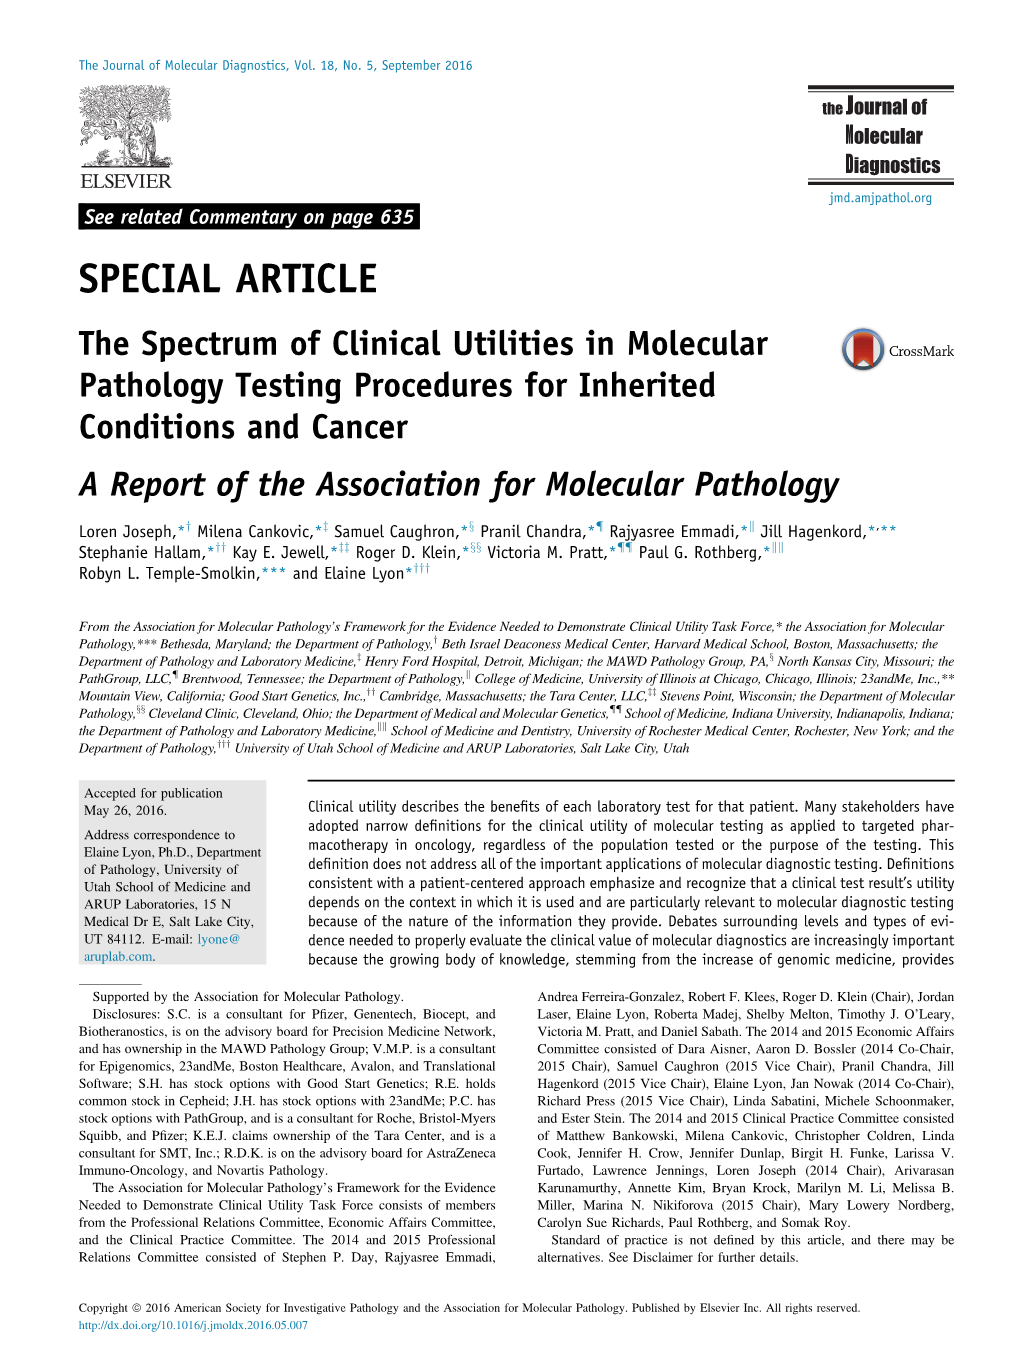 The Spectrum of Clinical Utilities in Molecular Pathology Testing Procedures for Inherited Conditions and Cancer a Report of the Association for Molecular Pathology